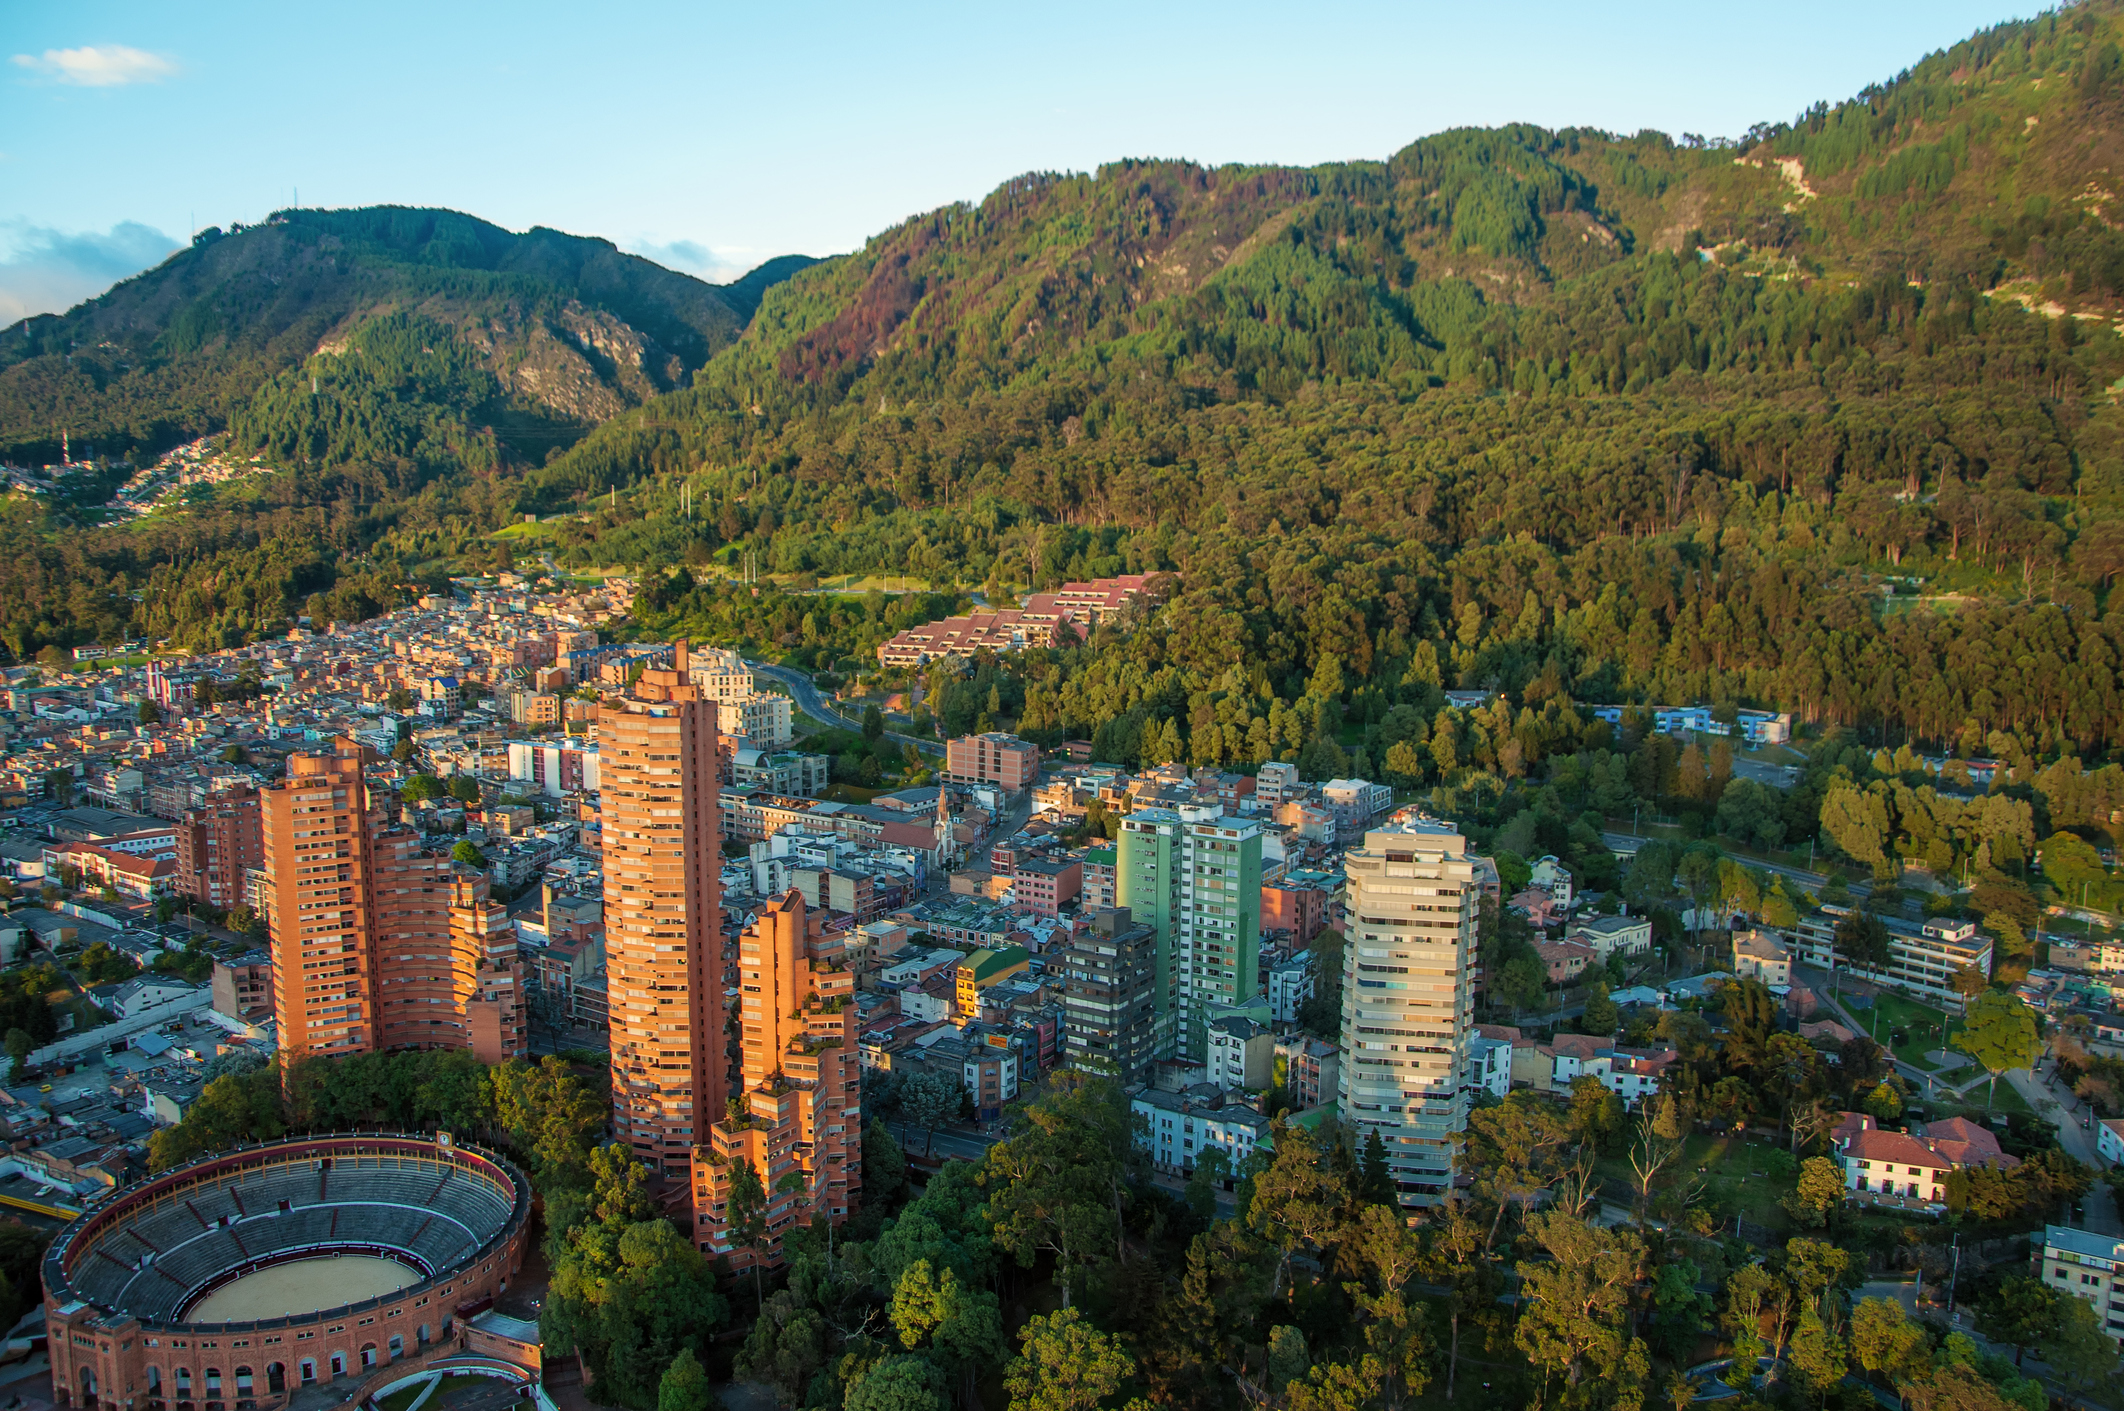 A view of Bogota from above